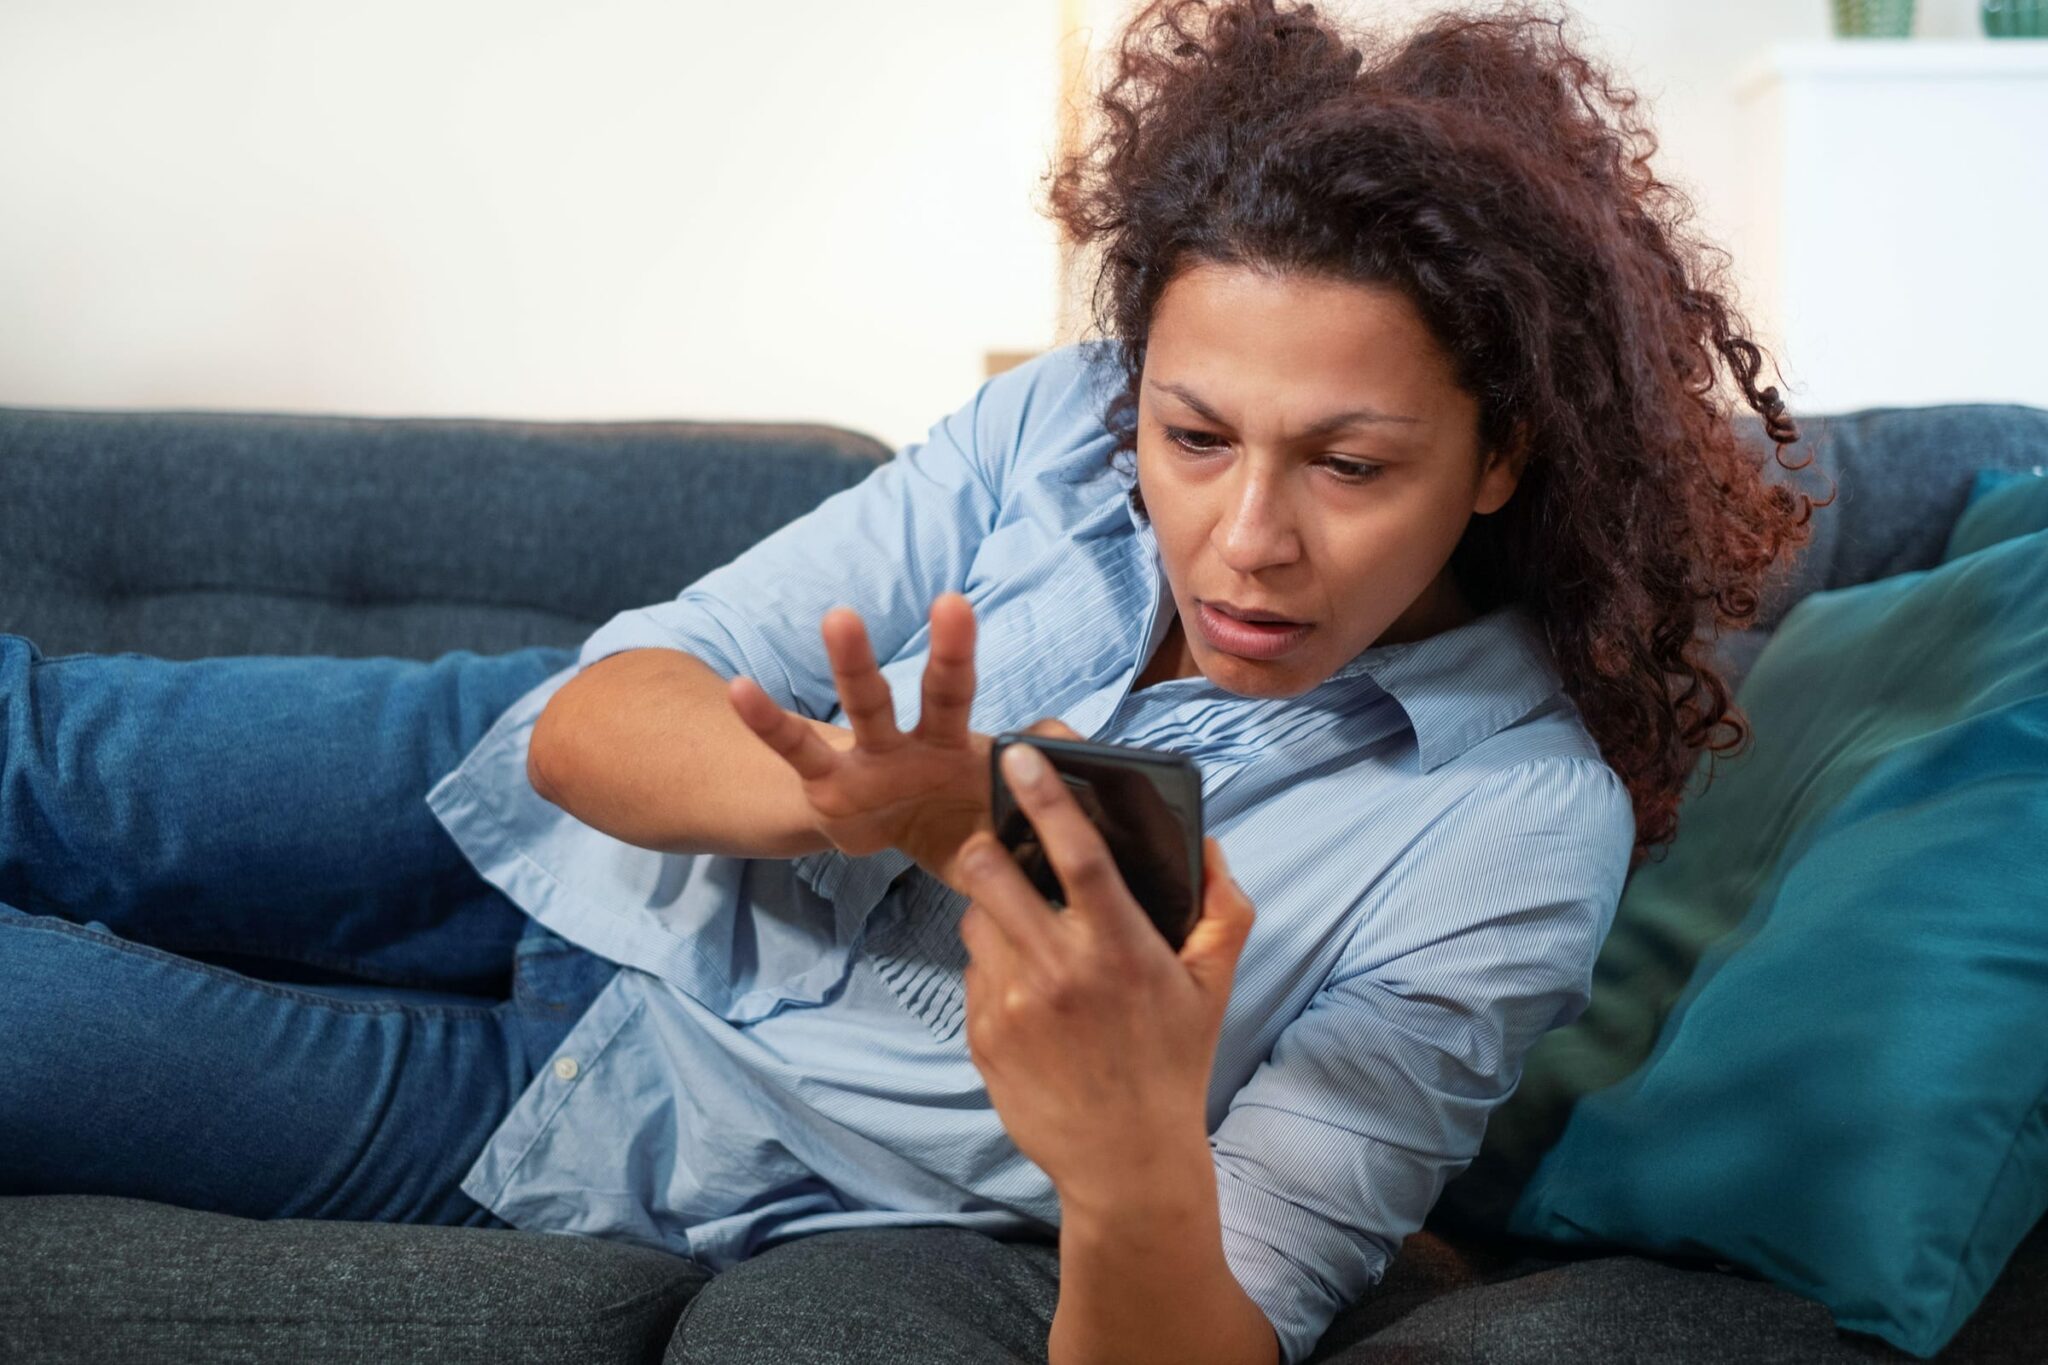 woman looks stressed looking at television remote